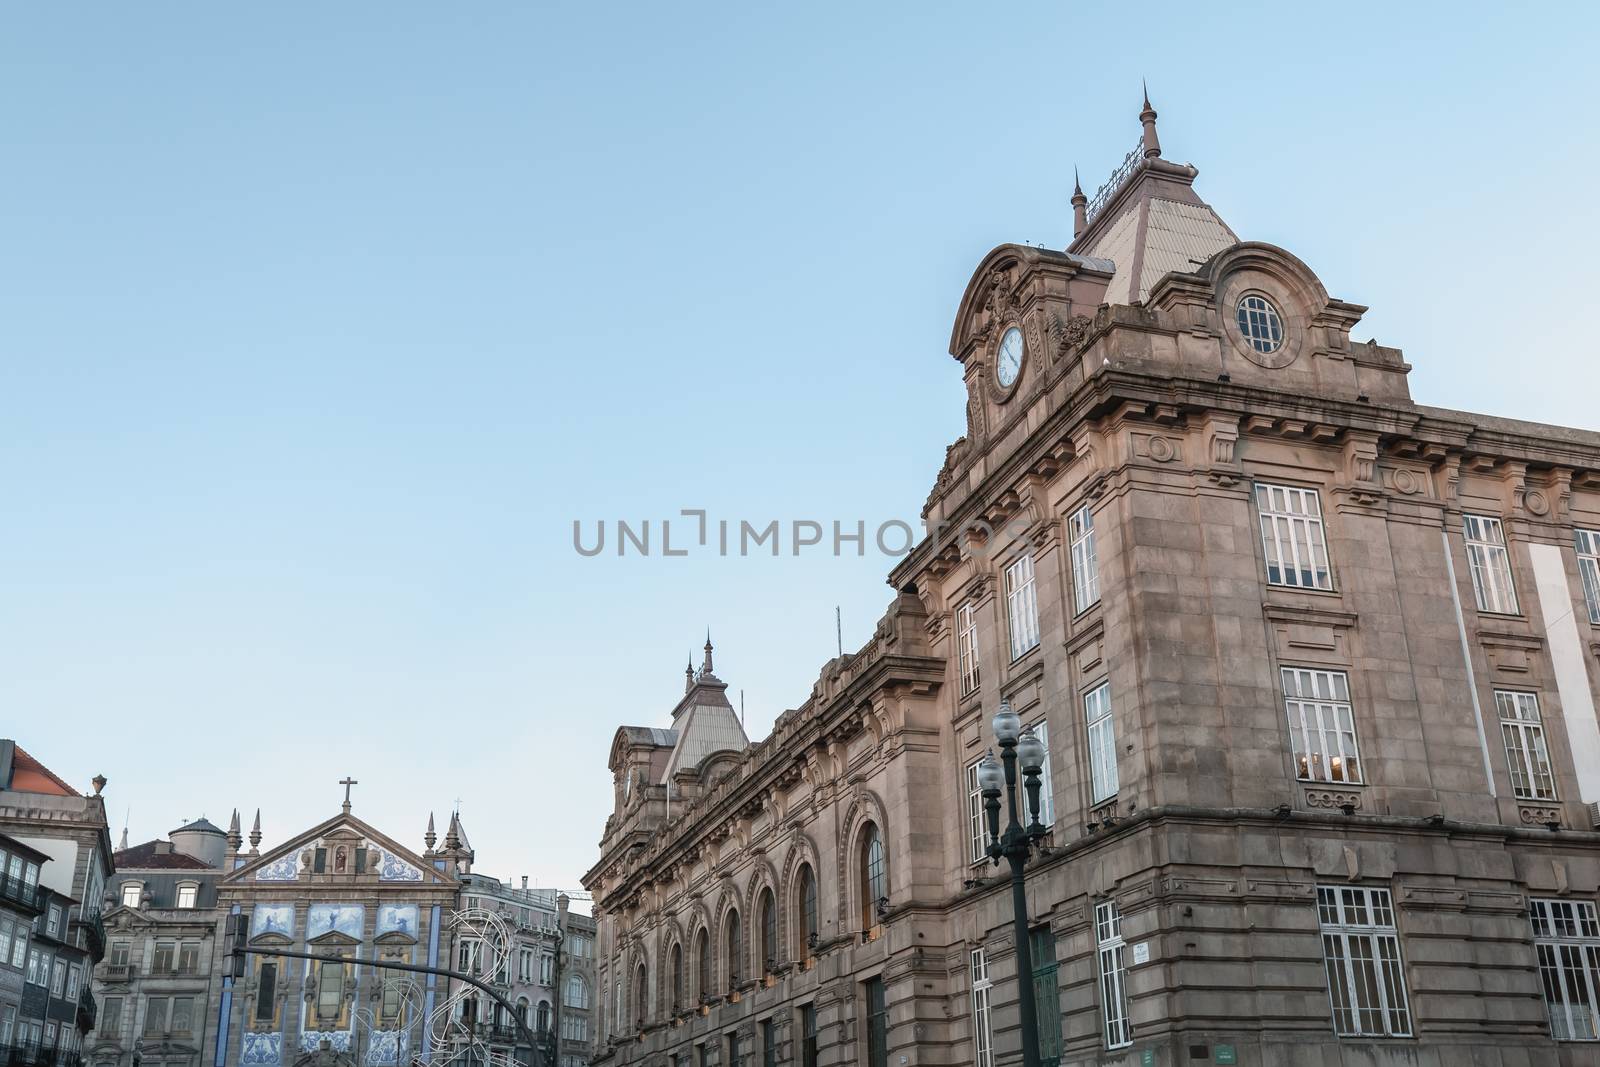 Porto, Portugal - November 30, 2018: Architecture detail of the exterior of the Porto train station on an autumn day